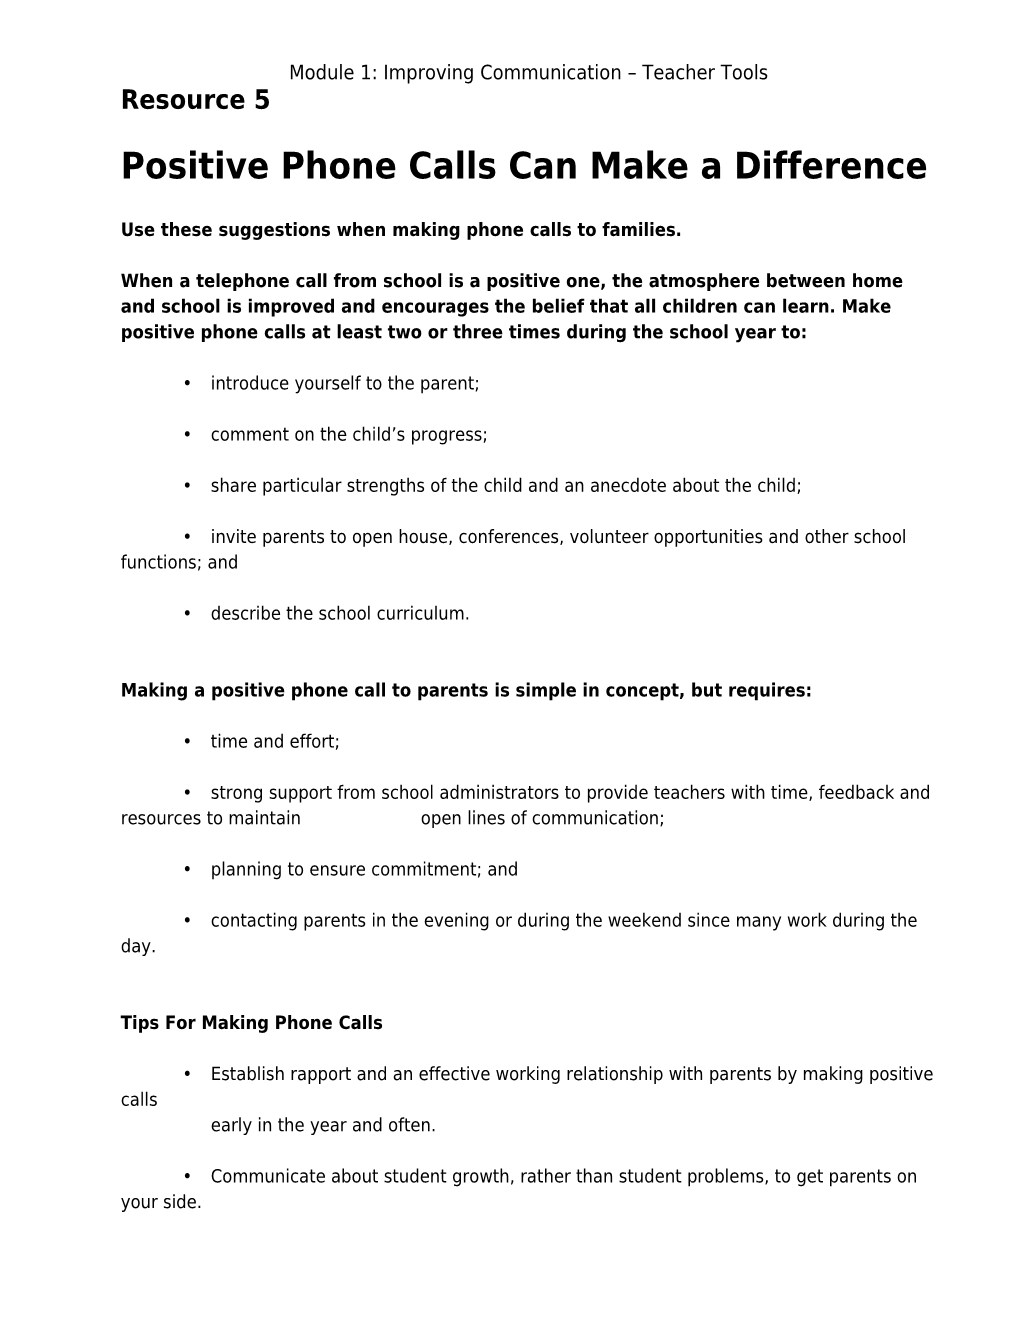 Positive Phone Calls Can Make a Difference